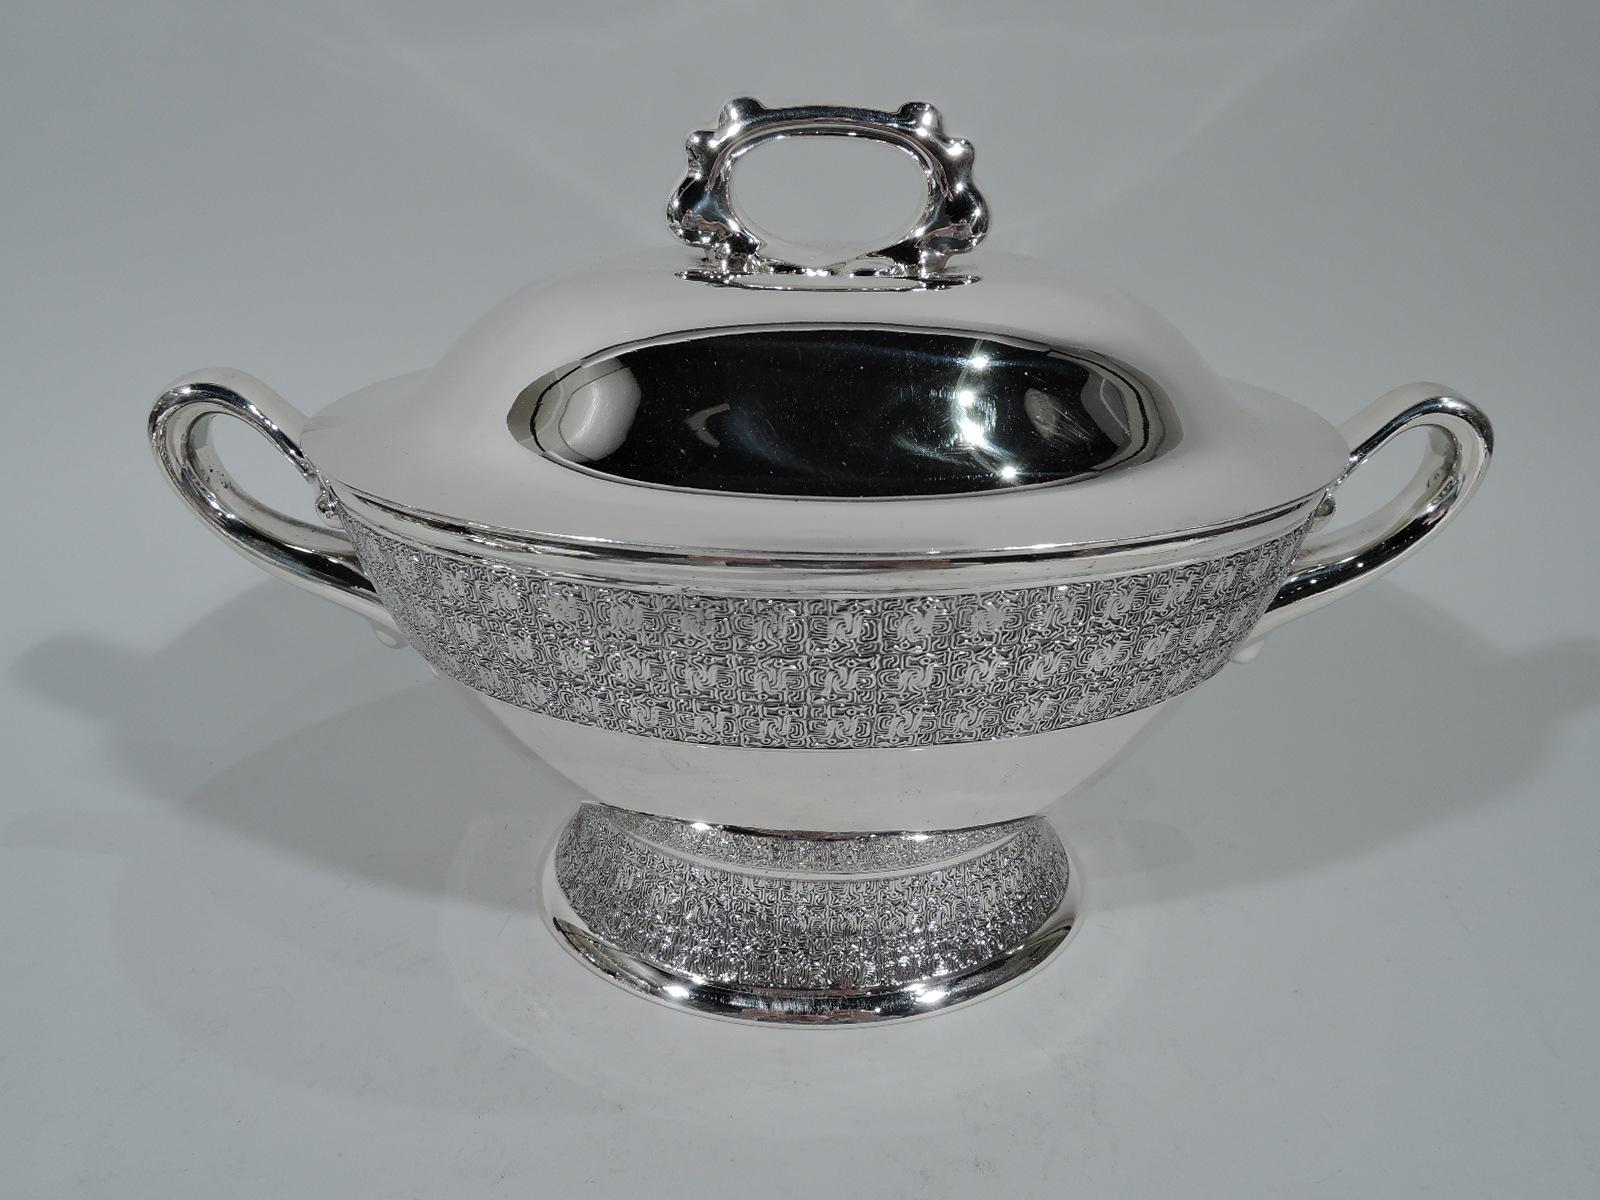 Stylish sterling silver tureen. Made by Tiffany & Co. in New York. Ovoid bowl, looping end handles with graduated “drips”, and raised and spread foot. Raised cover with notched ring finial. Dense and fluid fretwork bands. A late Victorian design